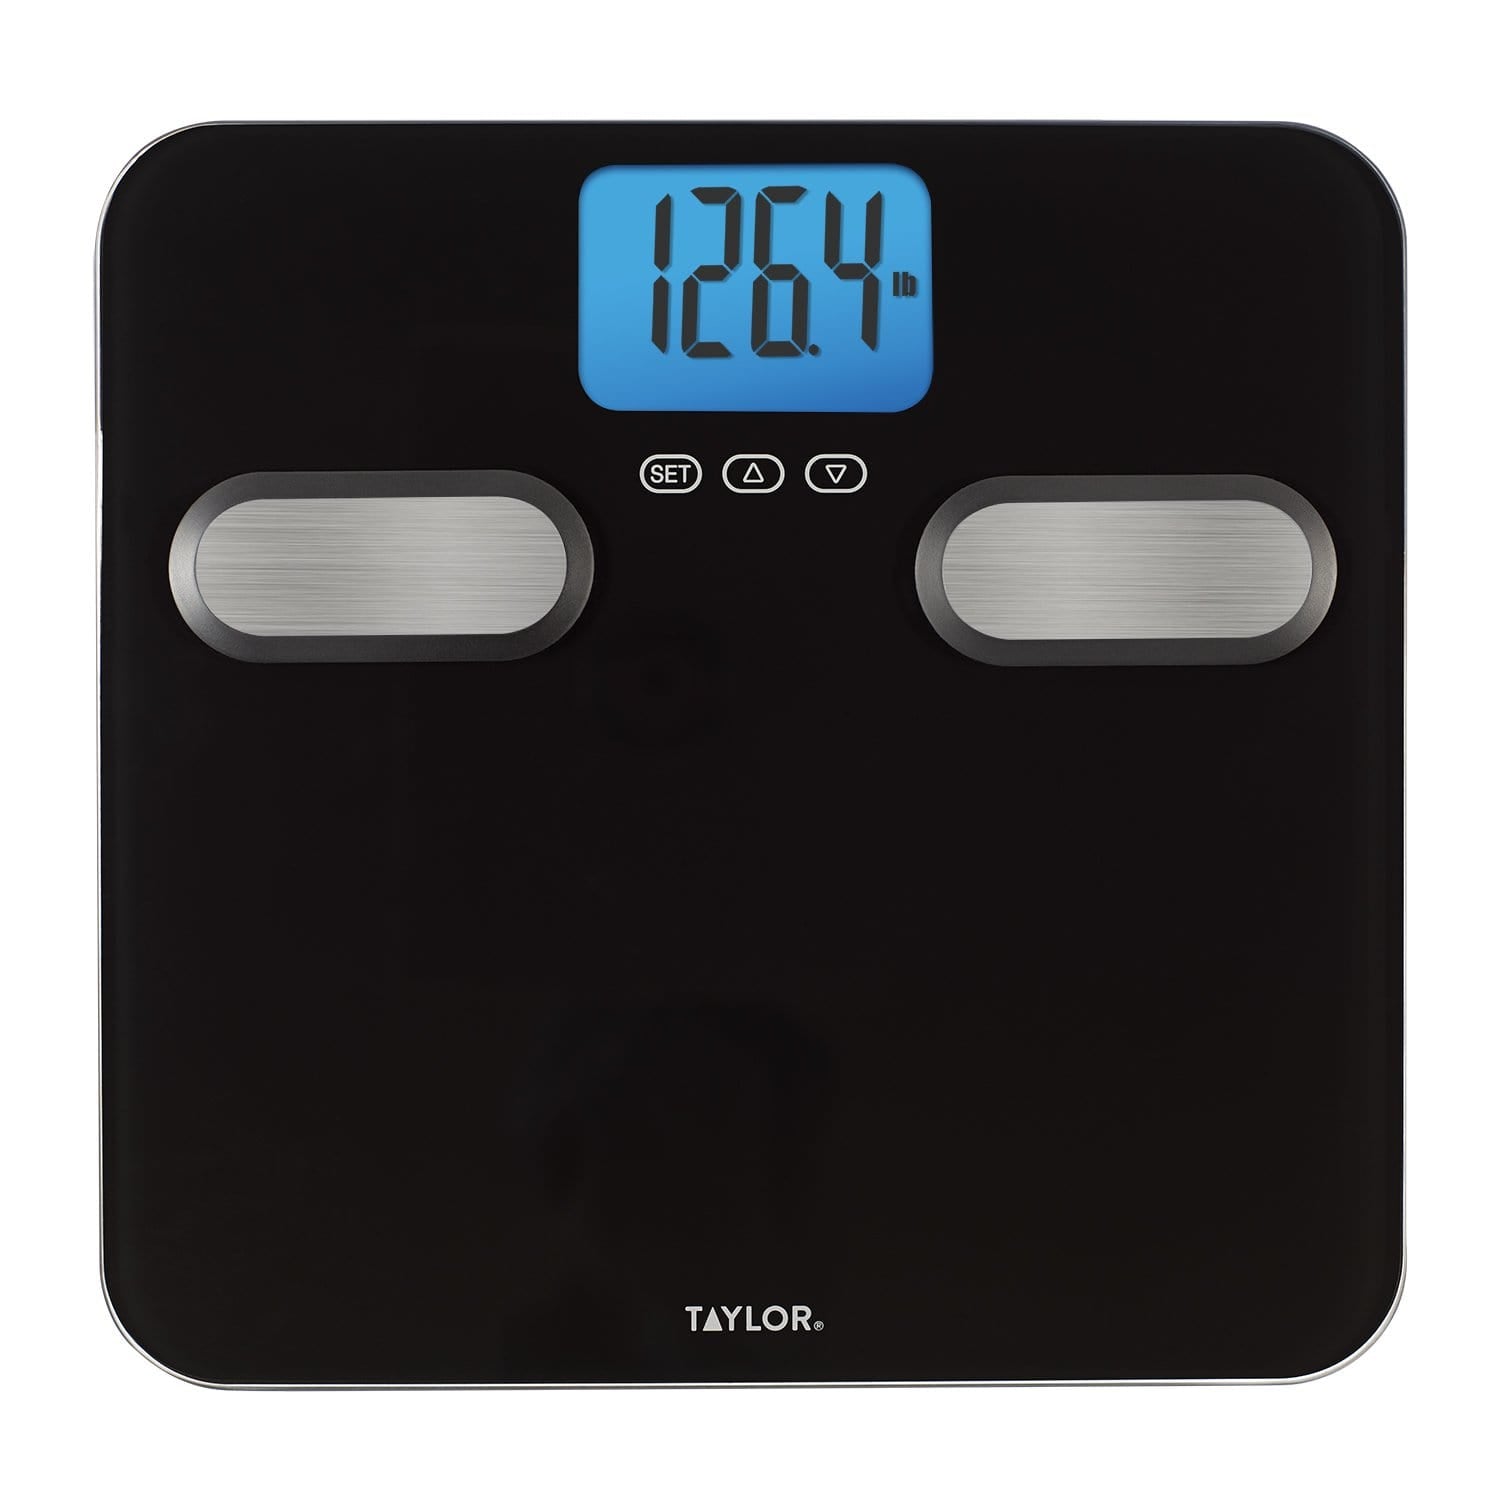 Do Body Fat Scales Work?